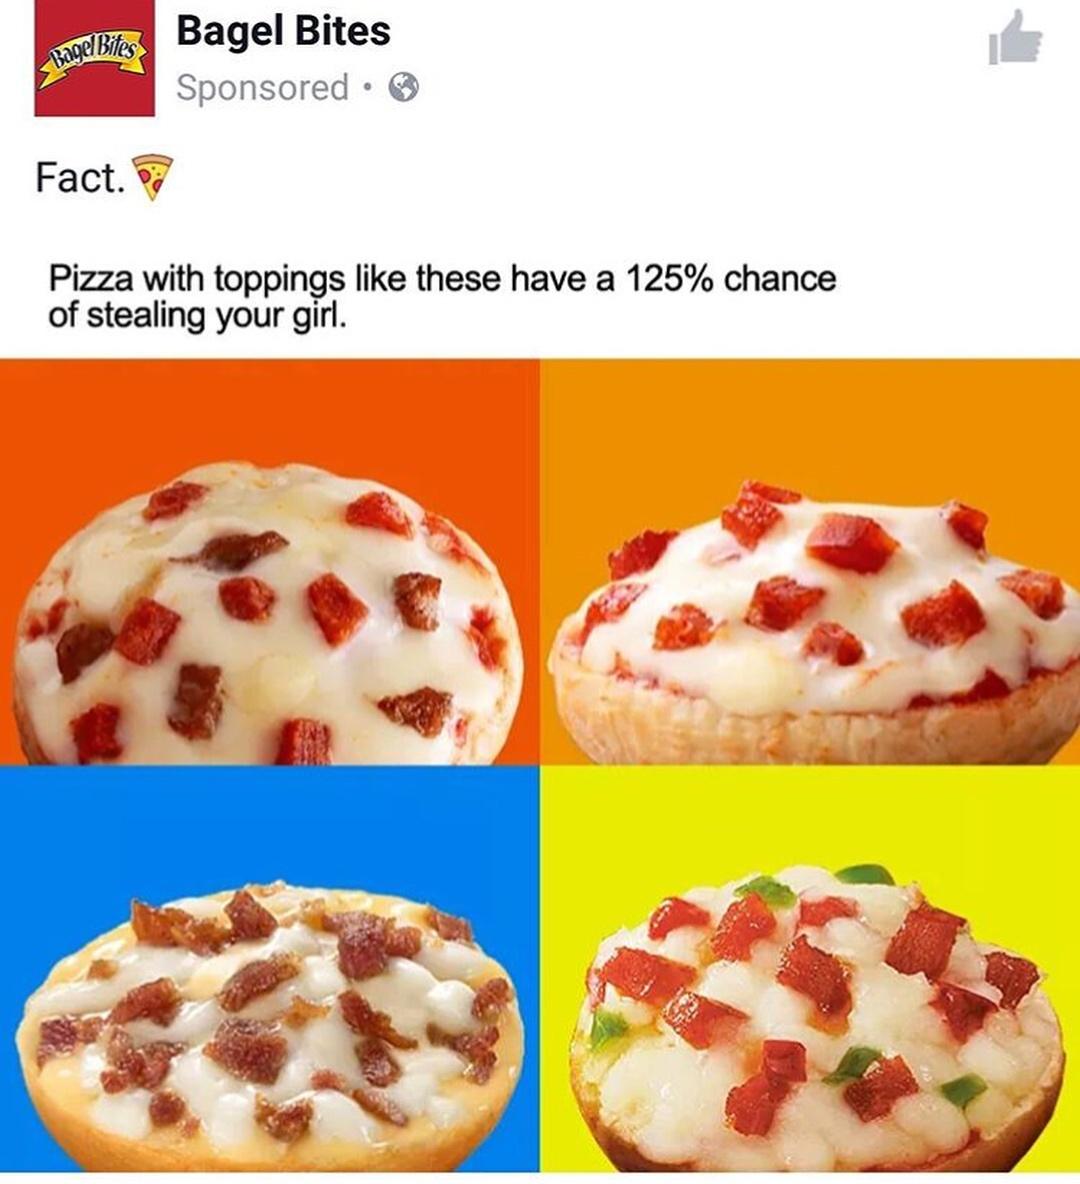 bagel bites meme - togel Bites Bagel Bites Sponsored Fact. Pizza with toppings these have a 125% chance of stealing your girl.